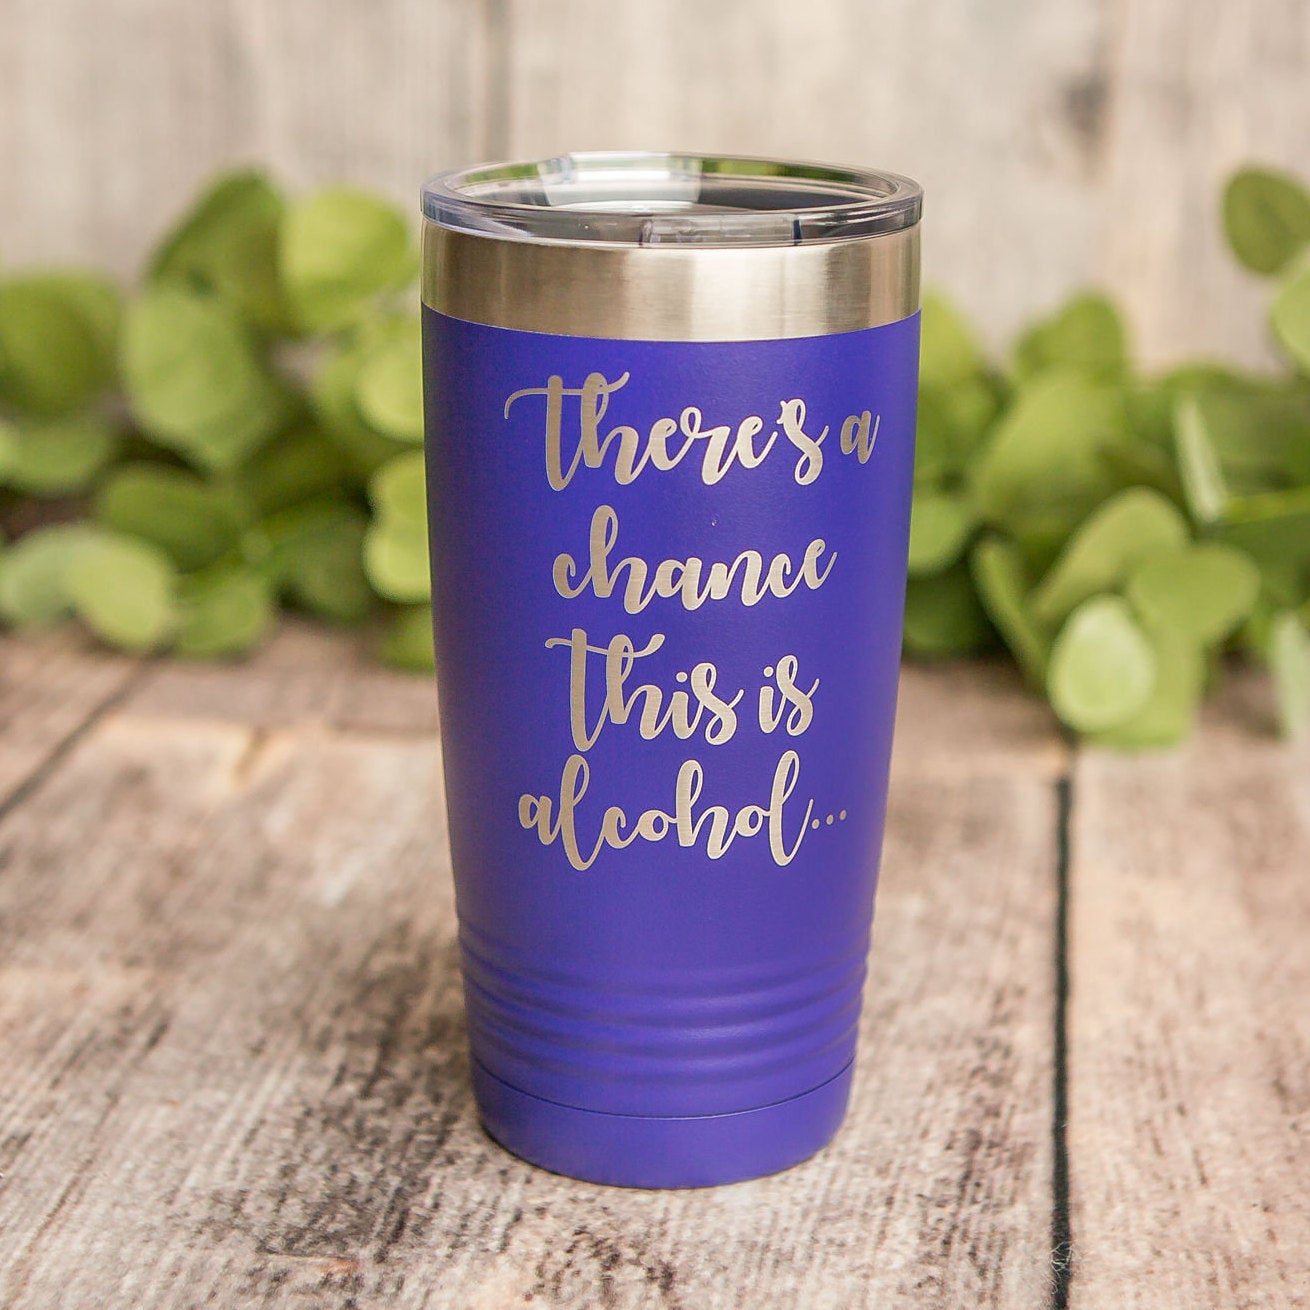 https://3cetching.com/wp-content/uploads/2020/09/theres-a-chance-this-is-alcohol-engraved-stainless-steel-tumbler-yeti-style-cup-coffee-mug-5f5fa73d.jpg